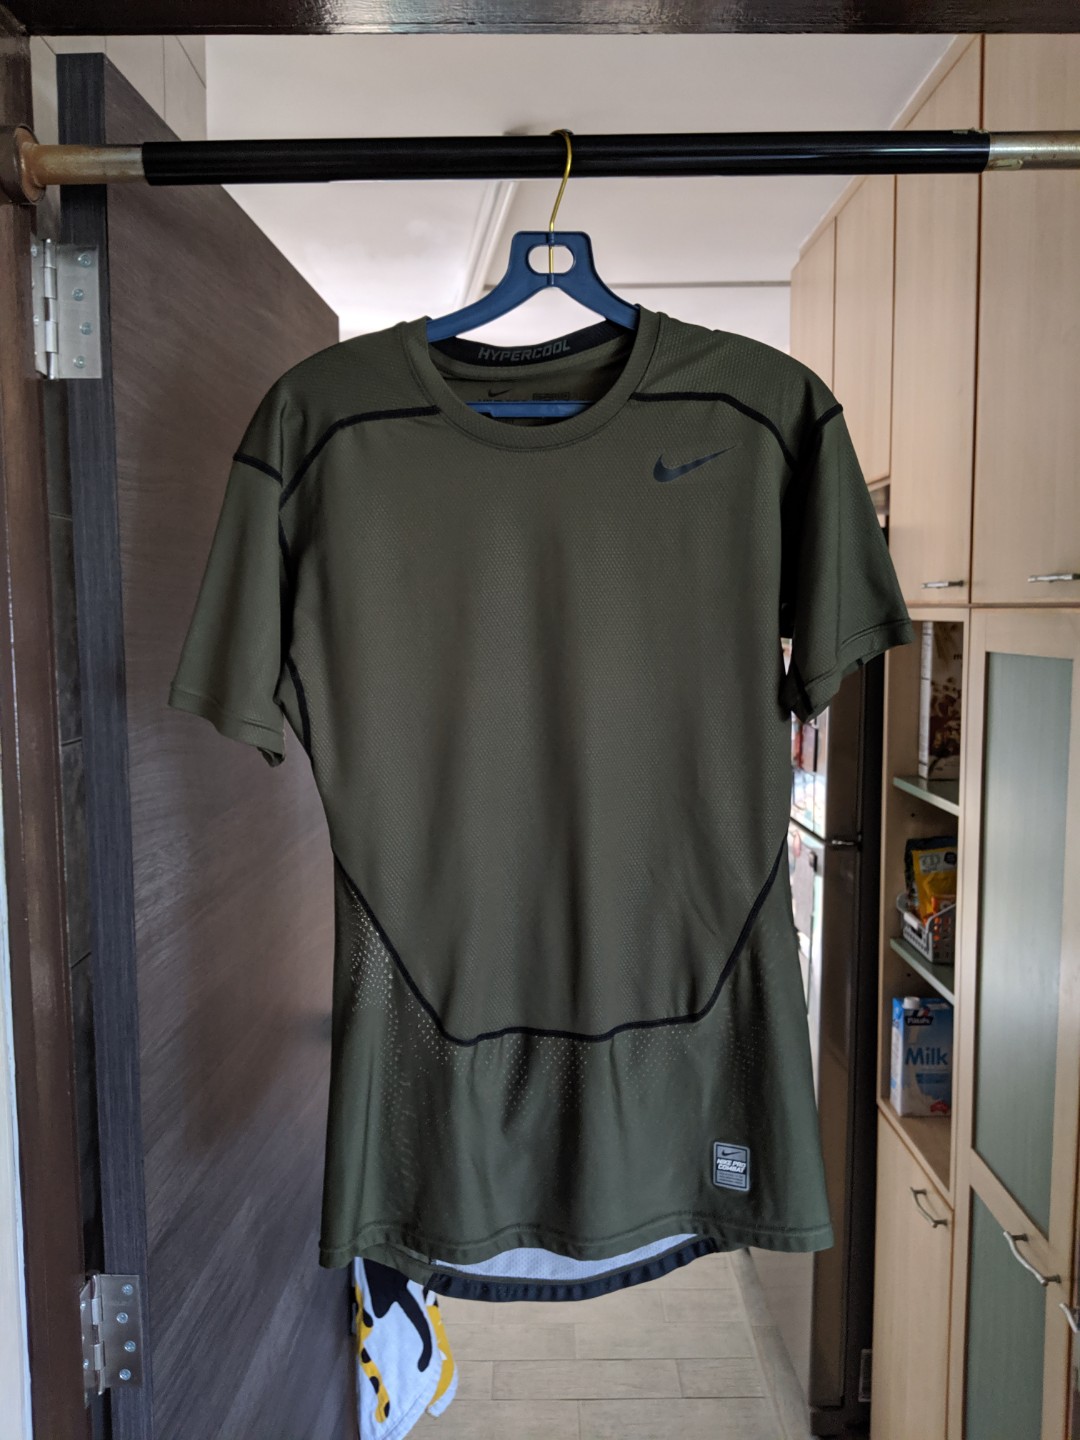 Nike Pro Compression Sports Training Shirt (XL size - Olive Green Colour), Men's Fashion, Activewear on Carousell